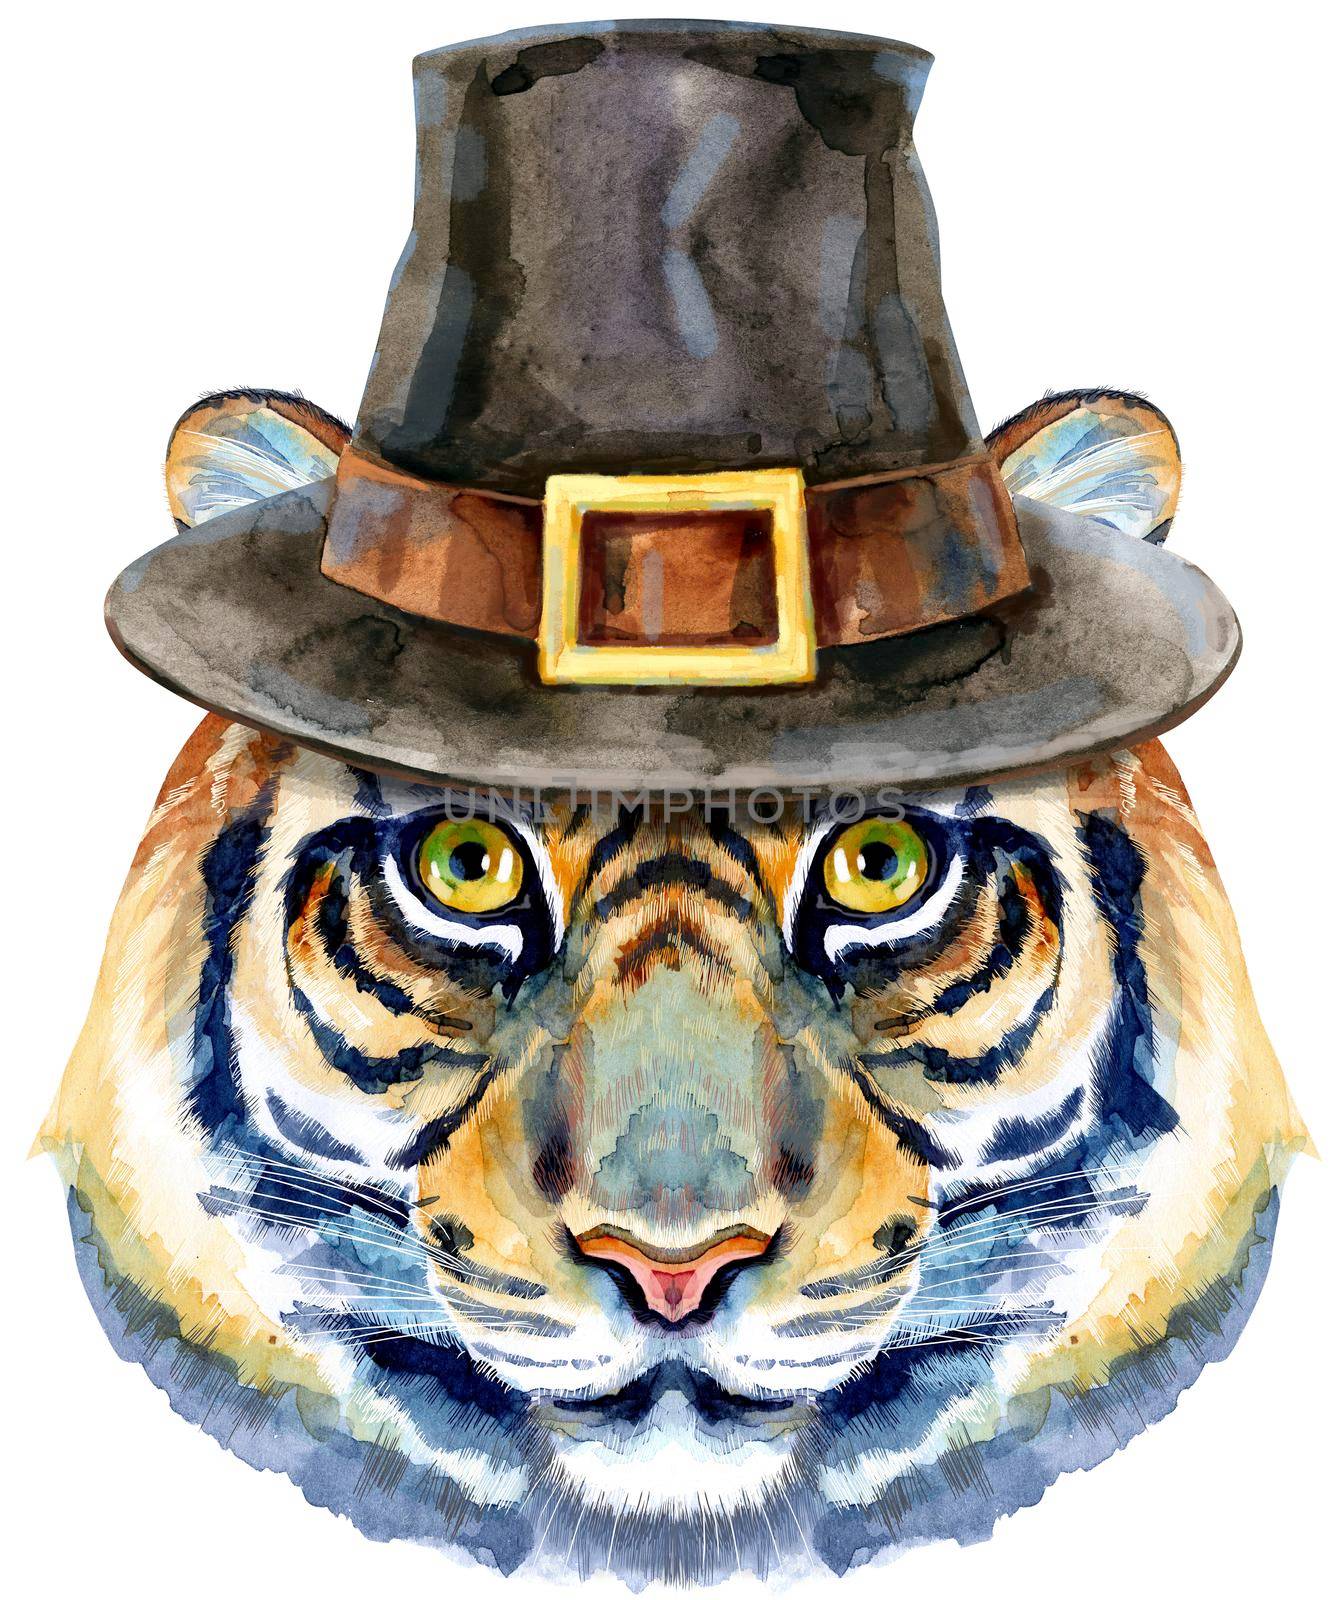 Tiger horoscope character watercolor illustration in the pilgrim's hat isolated on white background. by NataOmsk